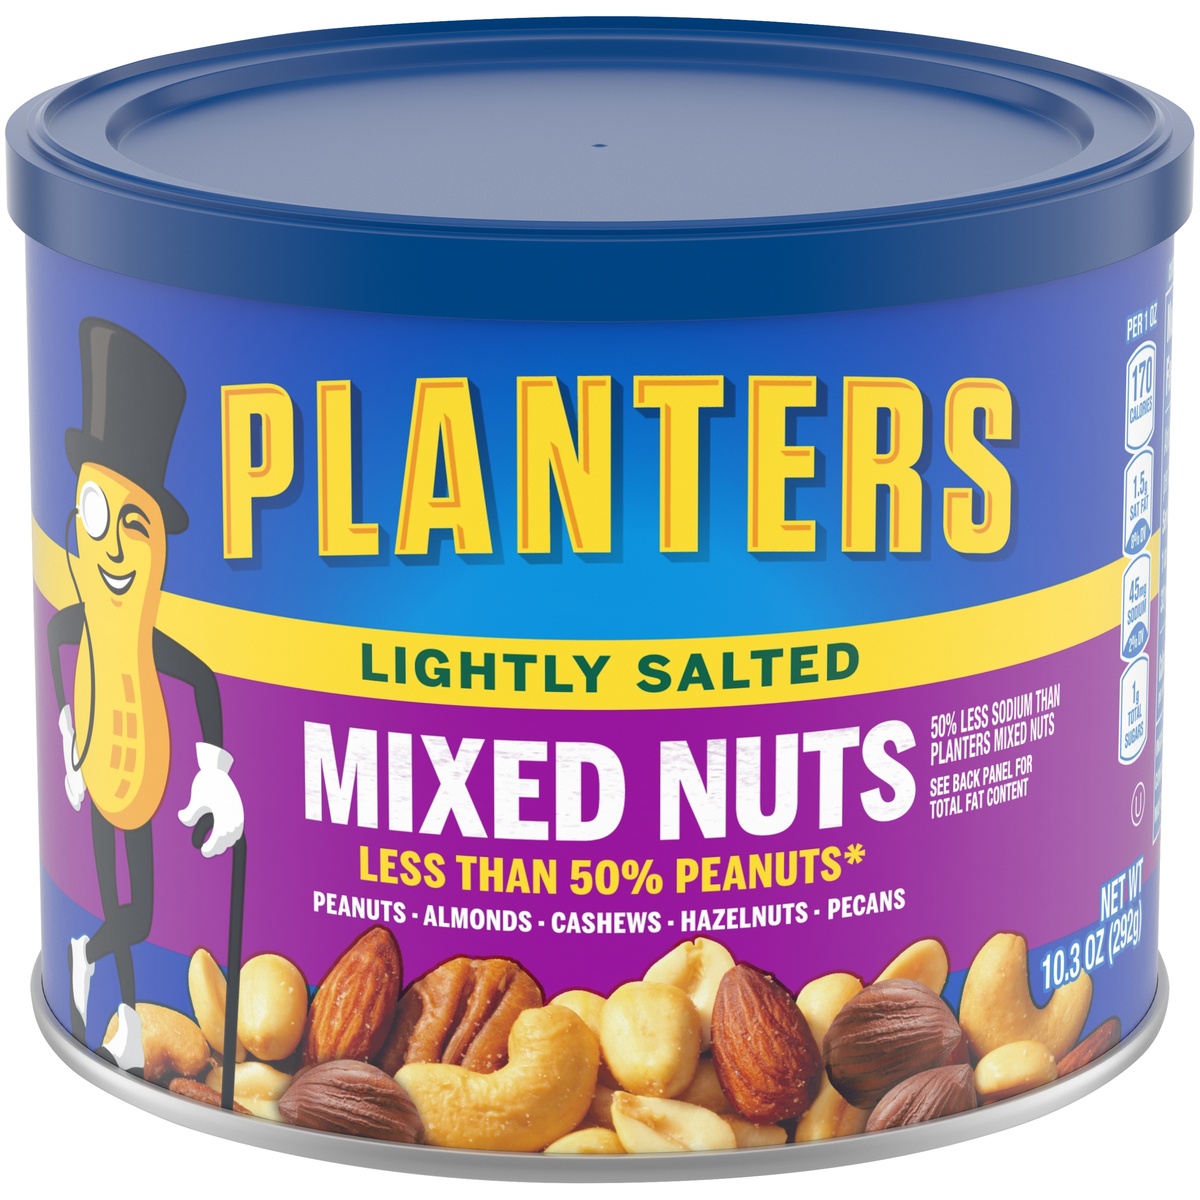 slide 1 of 11, Planters Lightly Salted Deluxe Mixed Nuts,Canister, 10.3 oz